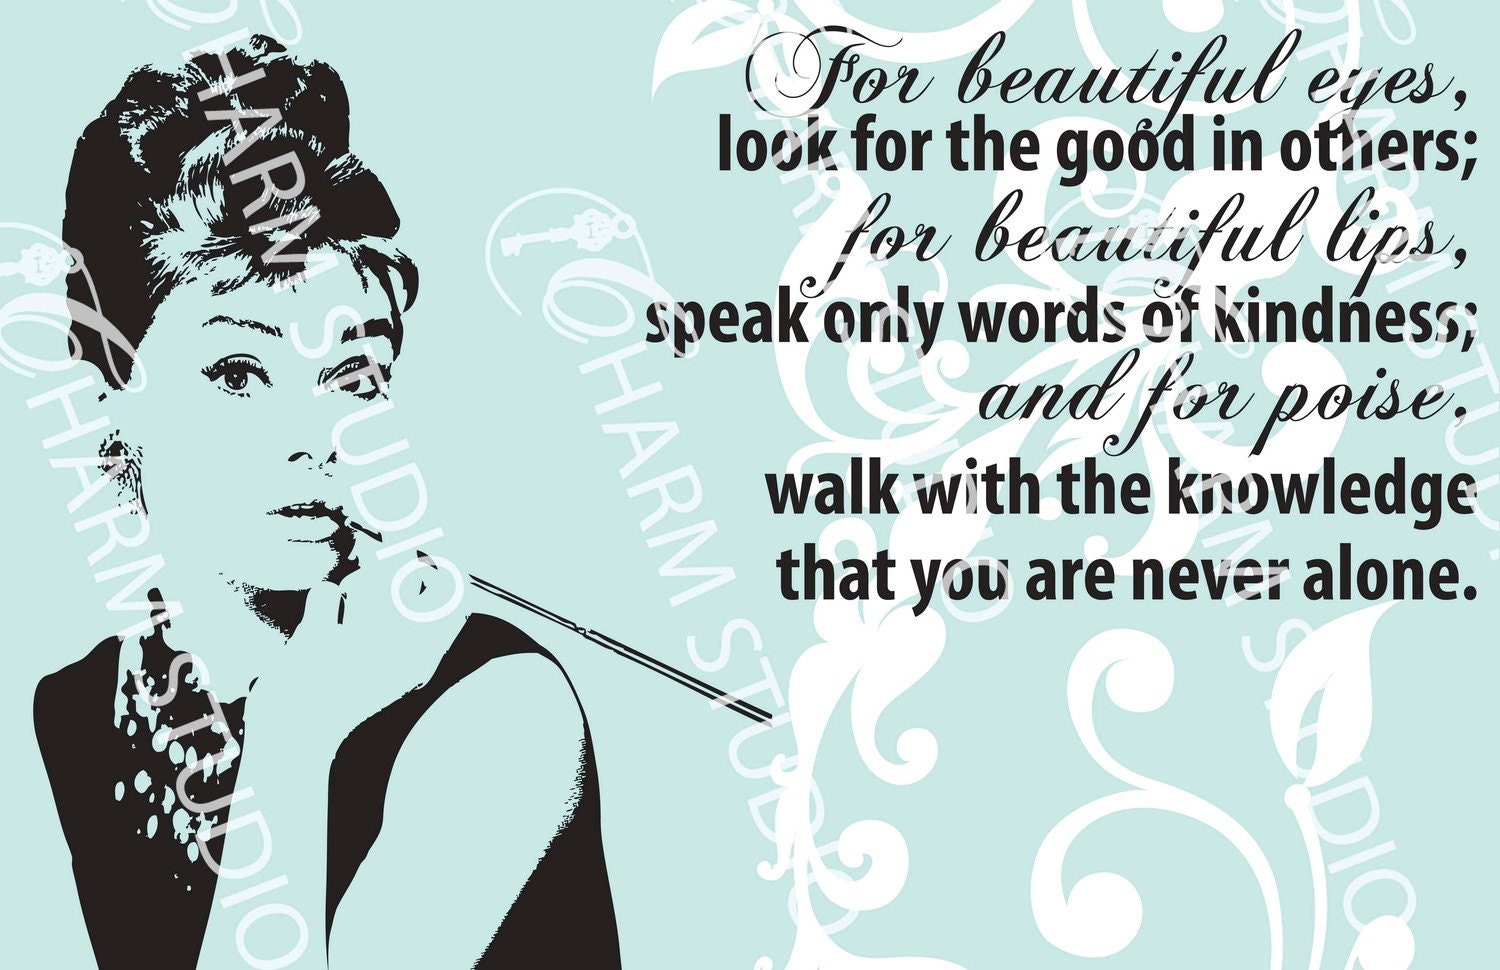 of Audrey Hepburn along with a quote on creating beauty within yourself